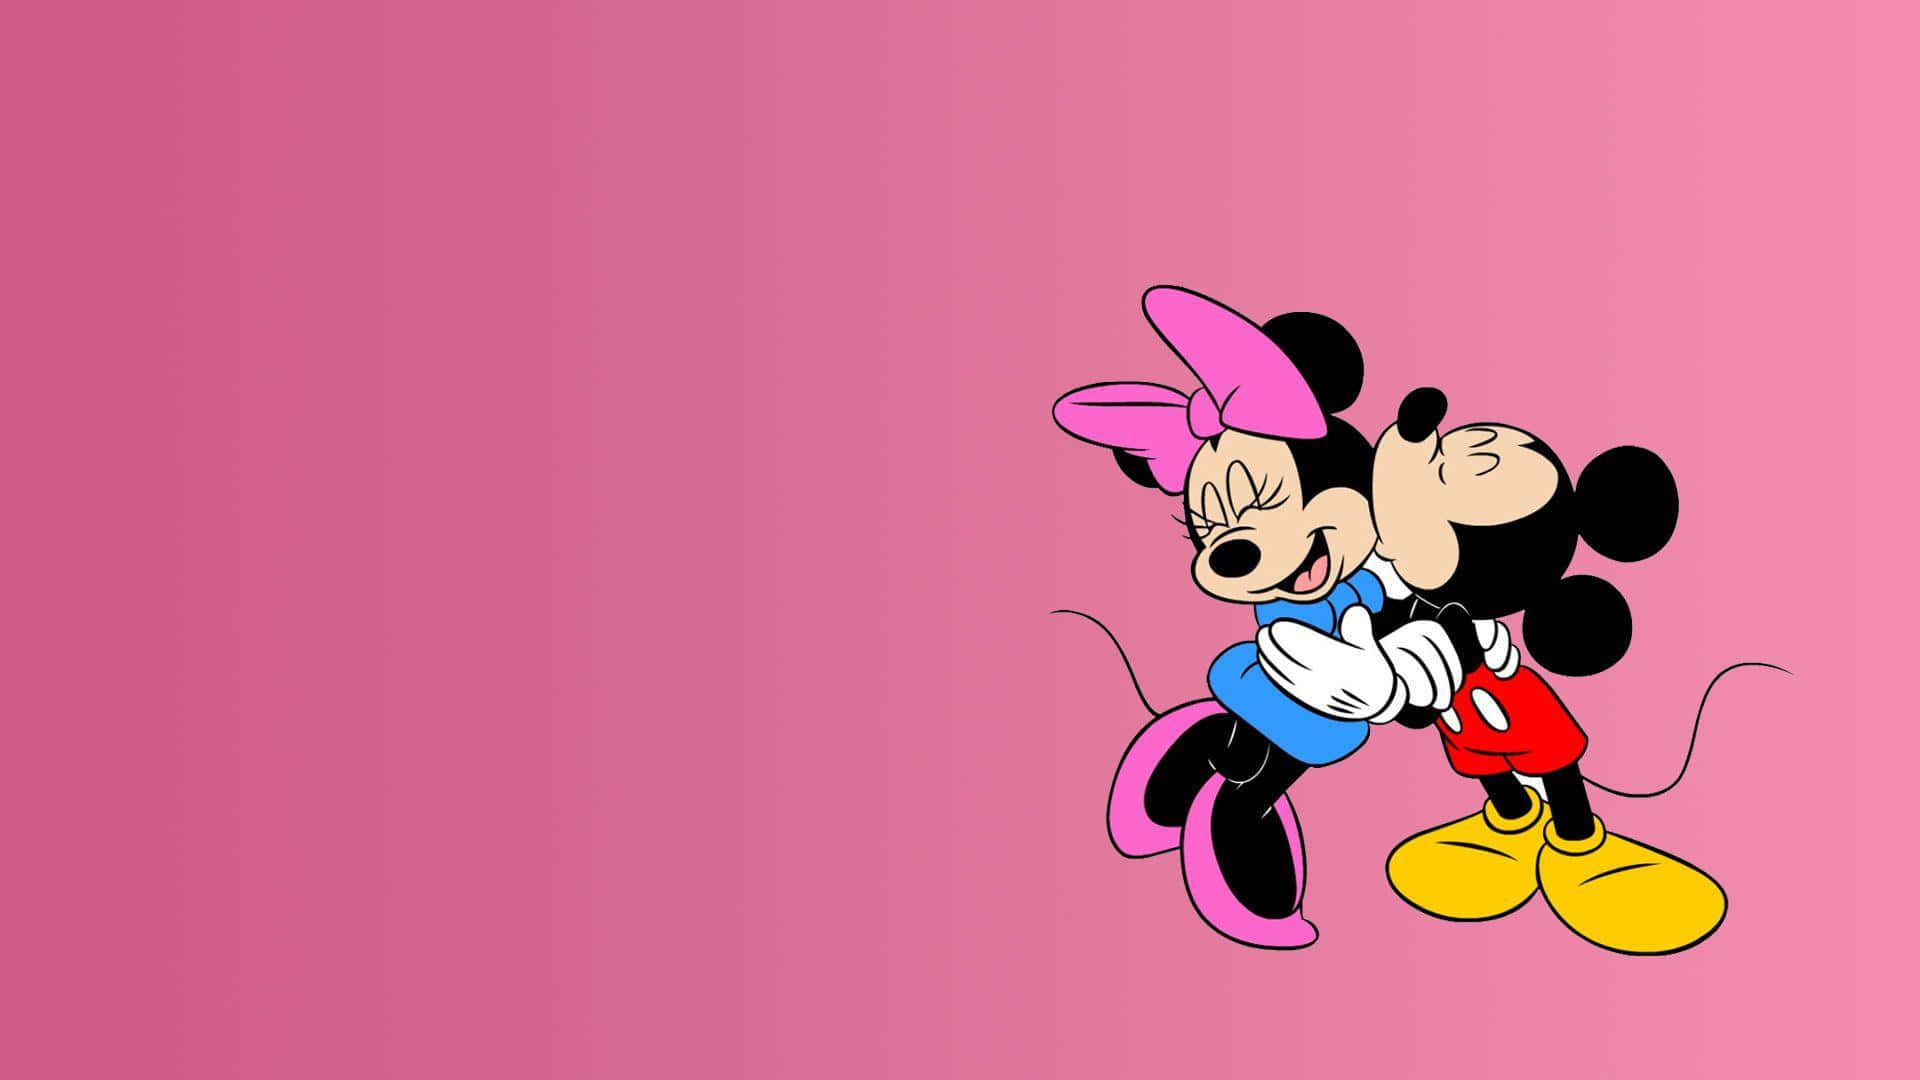 Disney's Mickey and Minnie Mouse share a tender moment